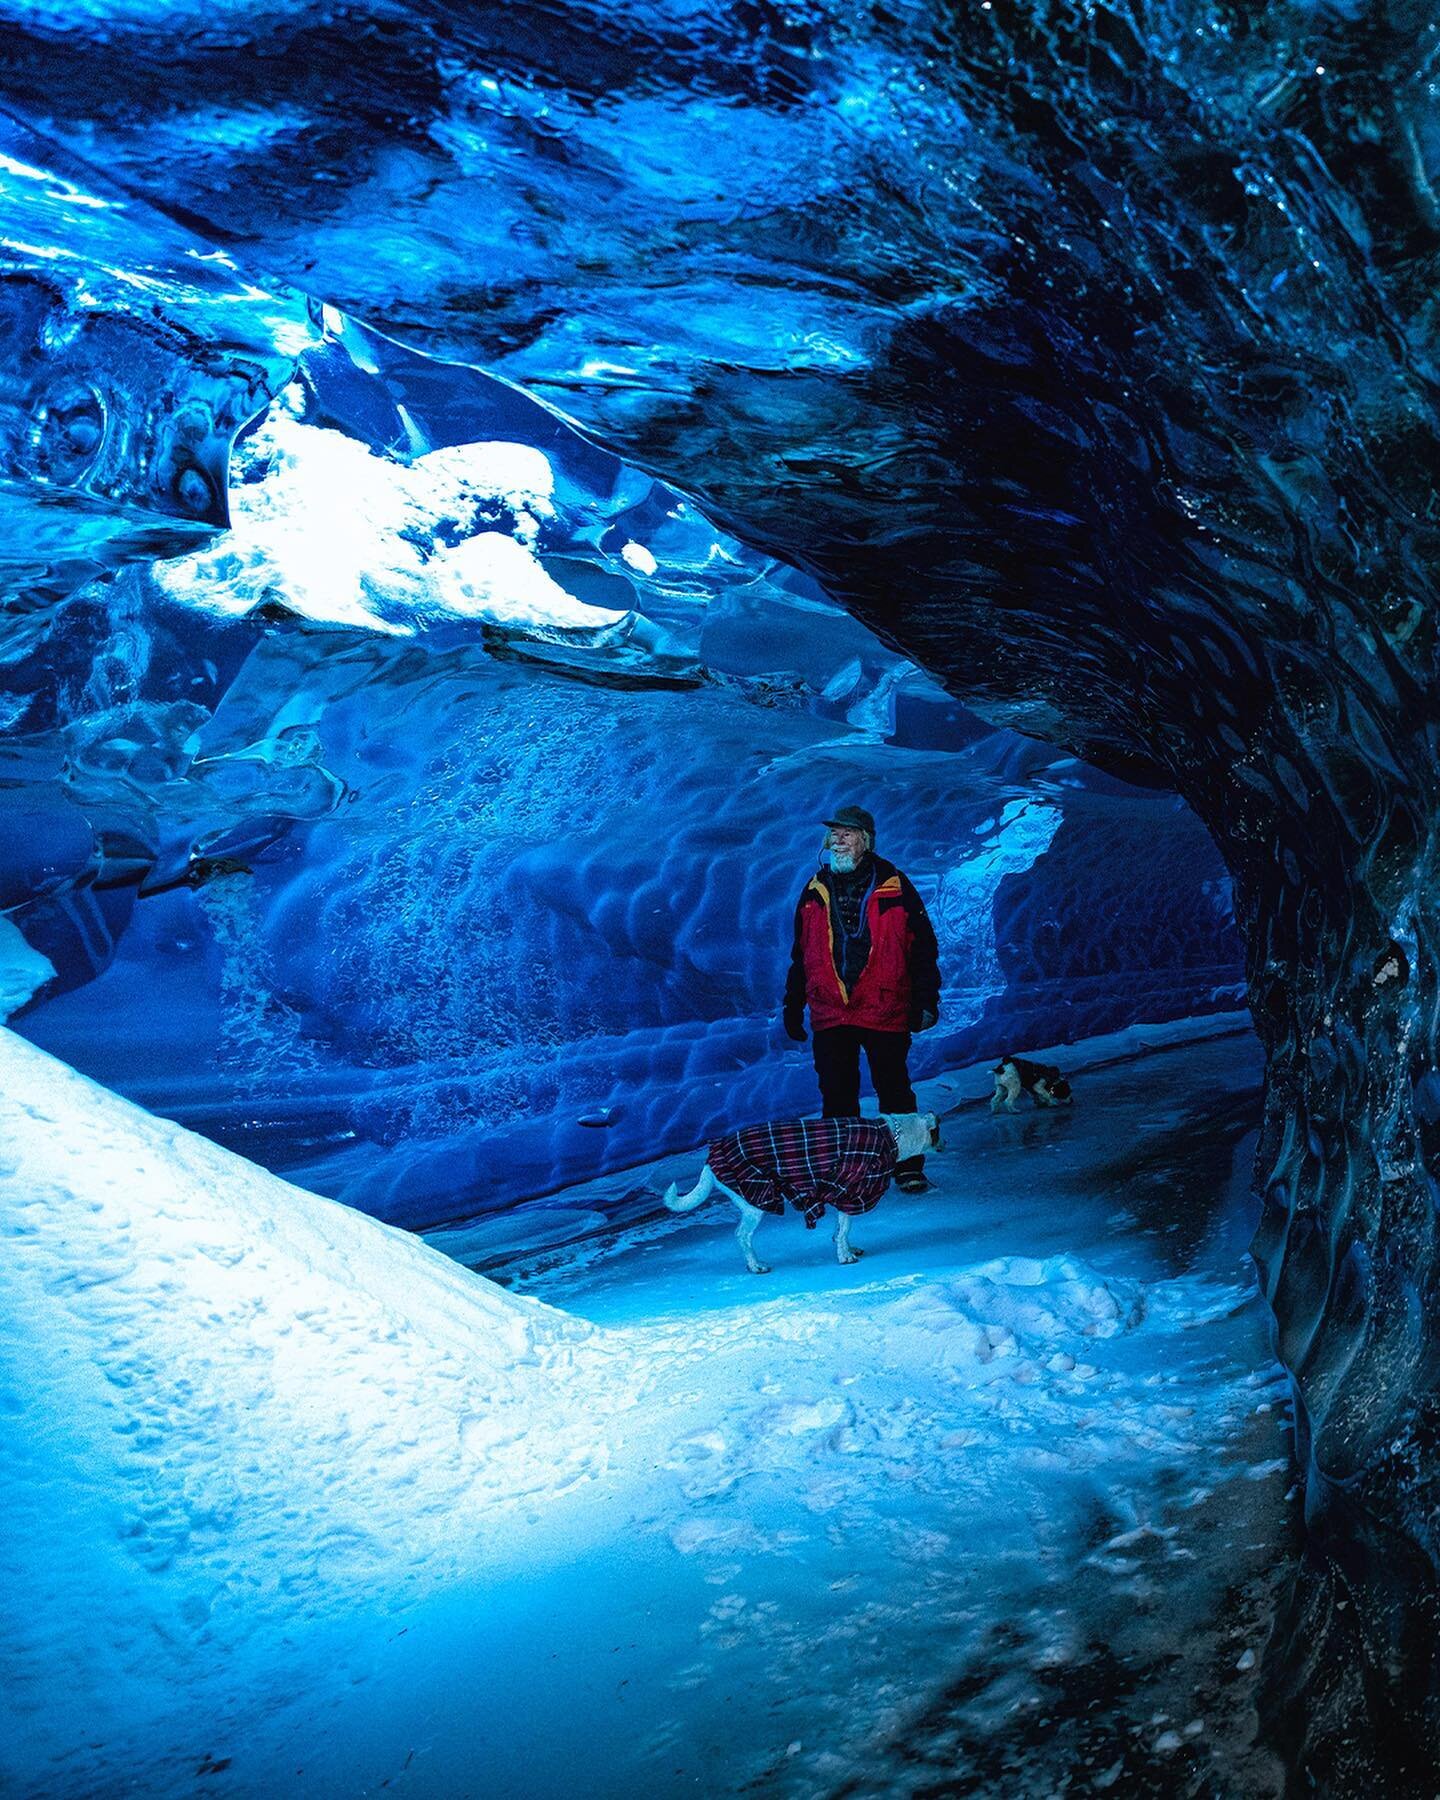 We took the coldest day in years as a chance to get out to the new ice caves without being around crowds.  This part of the cave is like two separate subway tunnels leading to the same spot. A stunning blue room. There&rsquo;s no wrong choice, just d